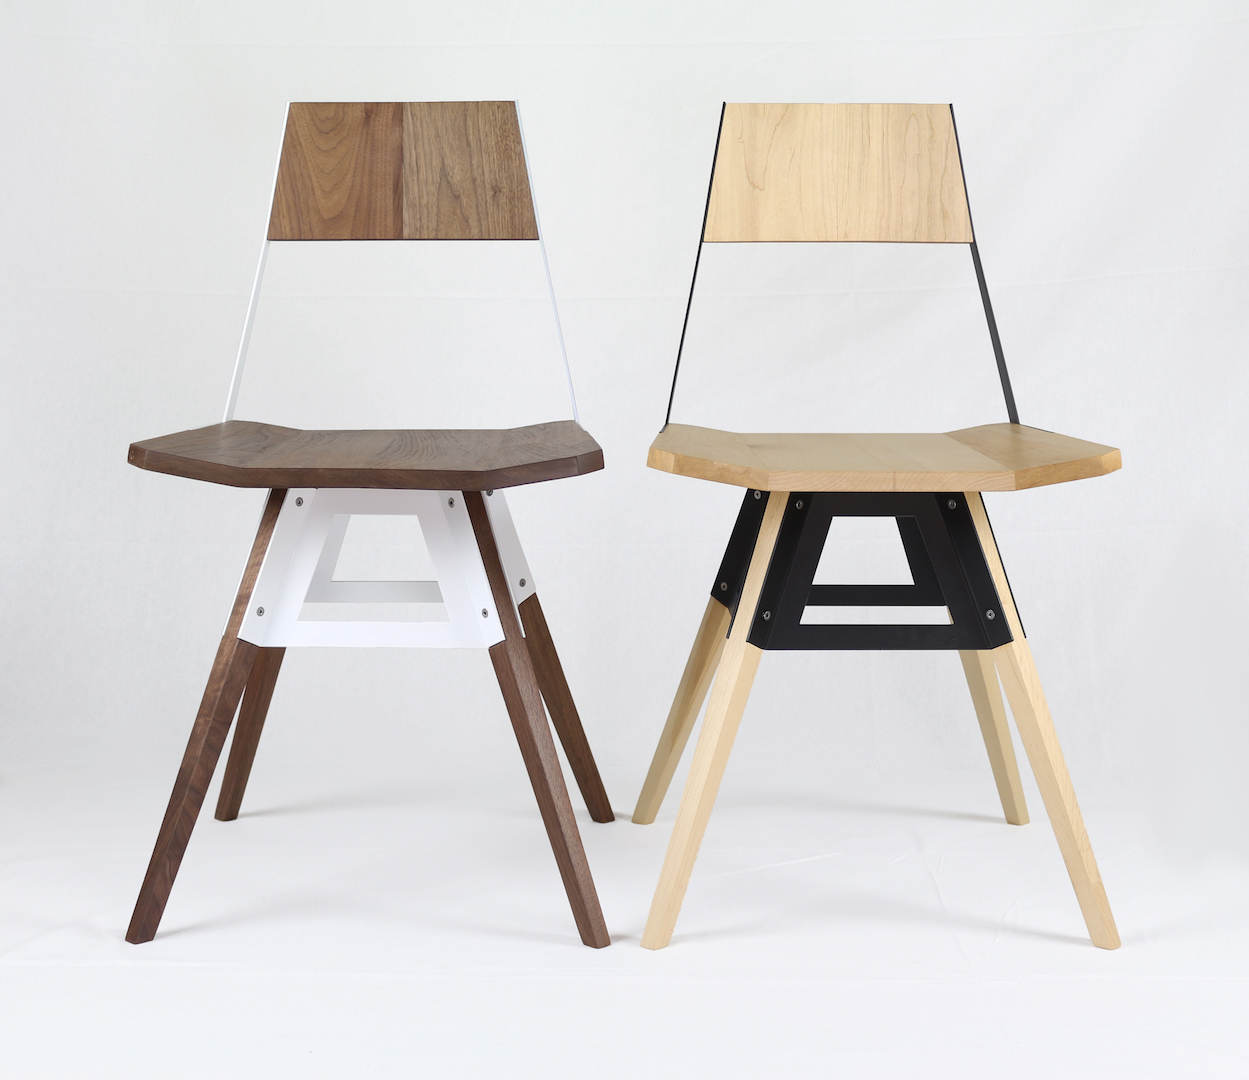 Tronk Design Debuts Three New Furniture Styles In Latest Collection